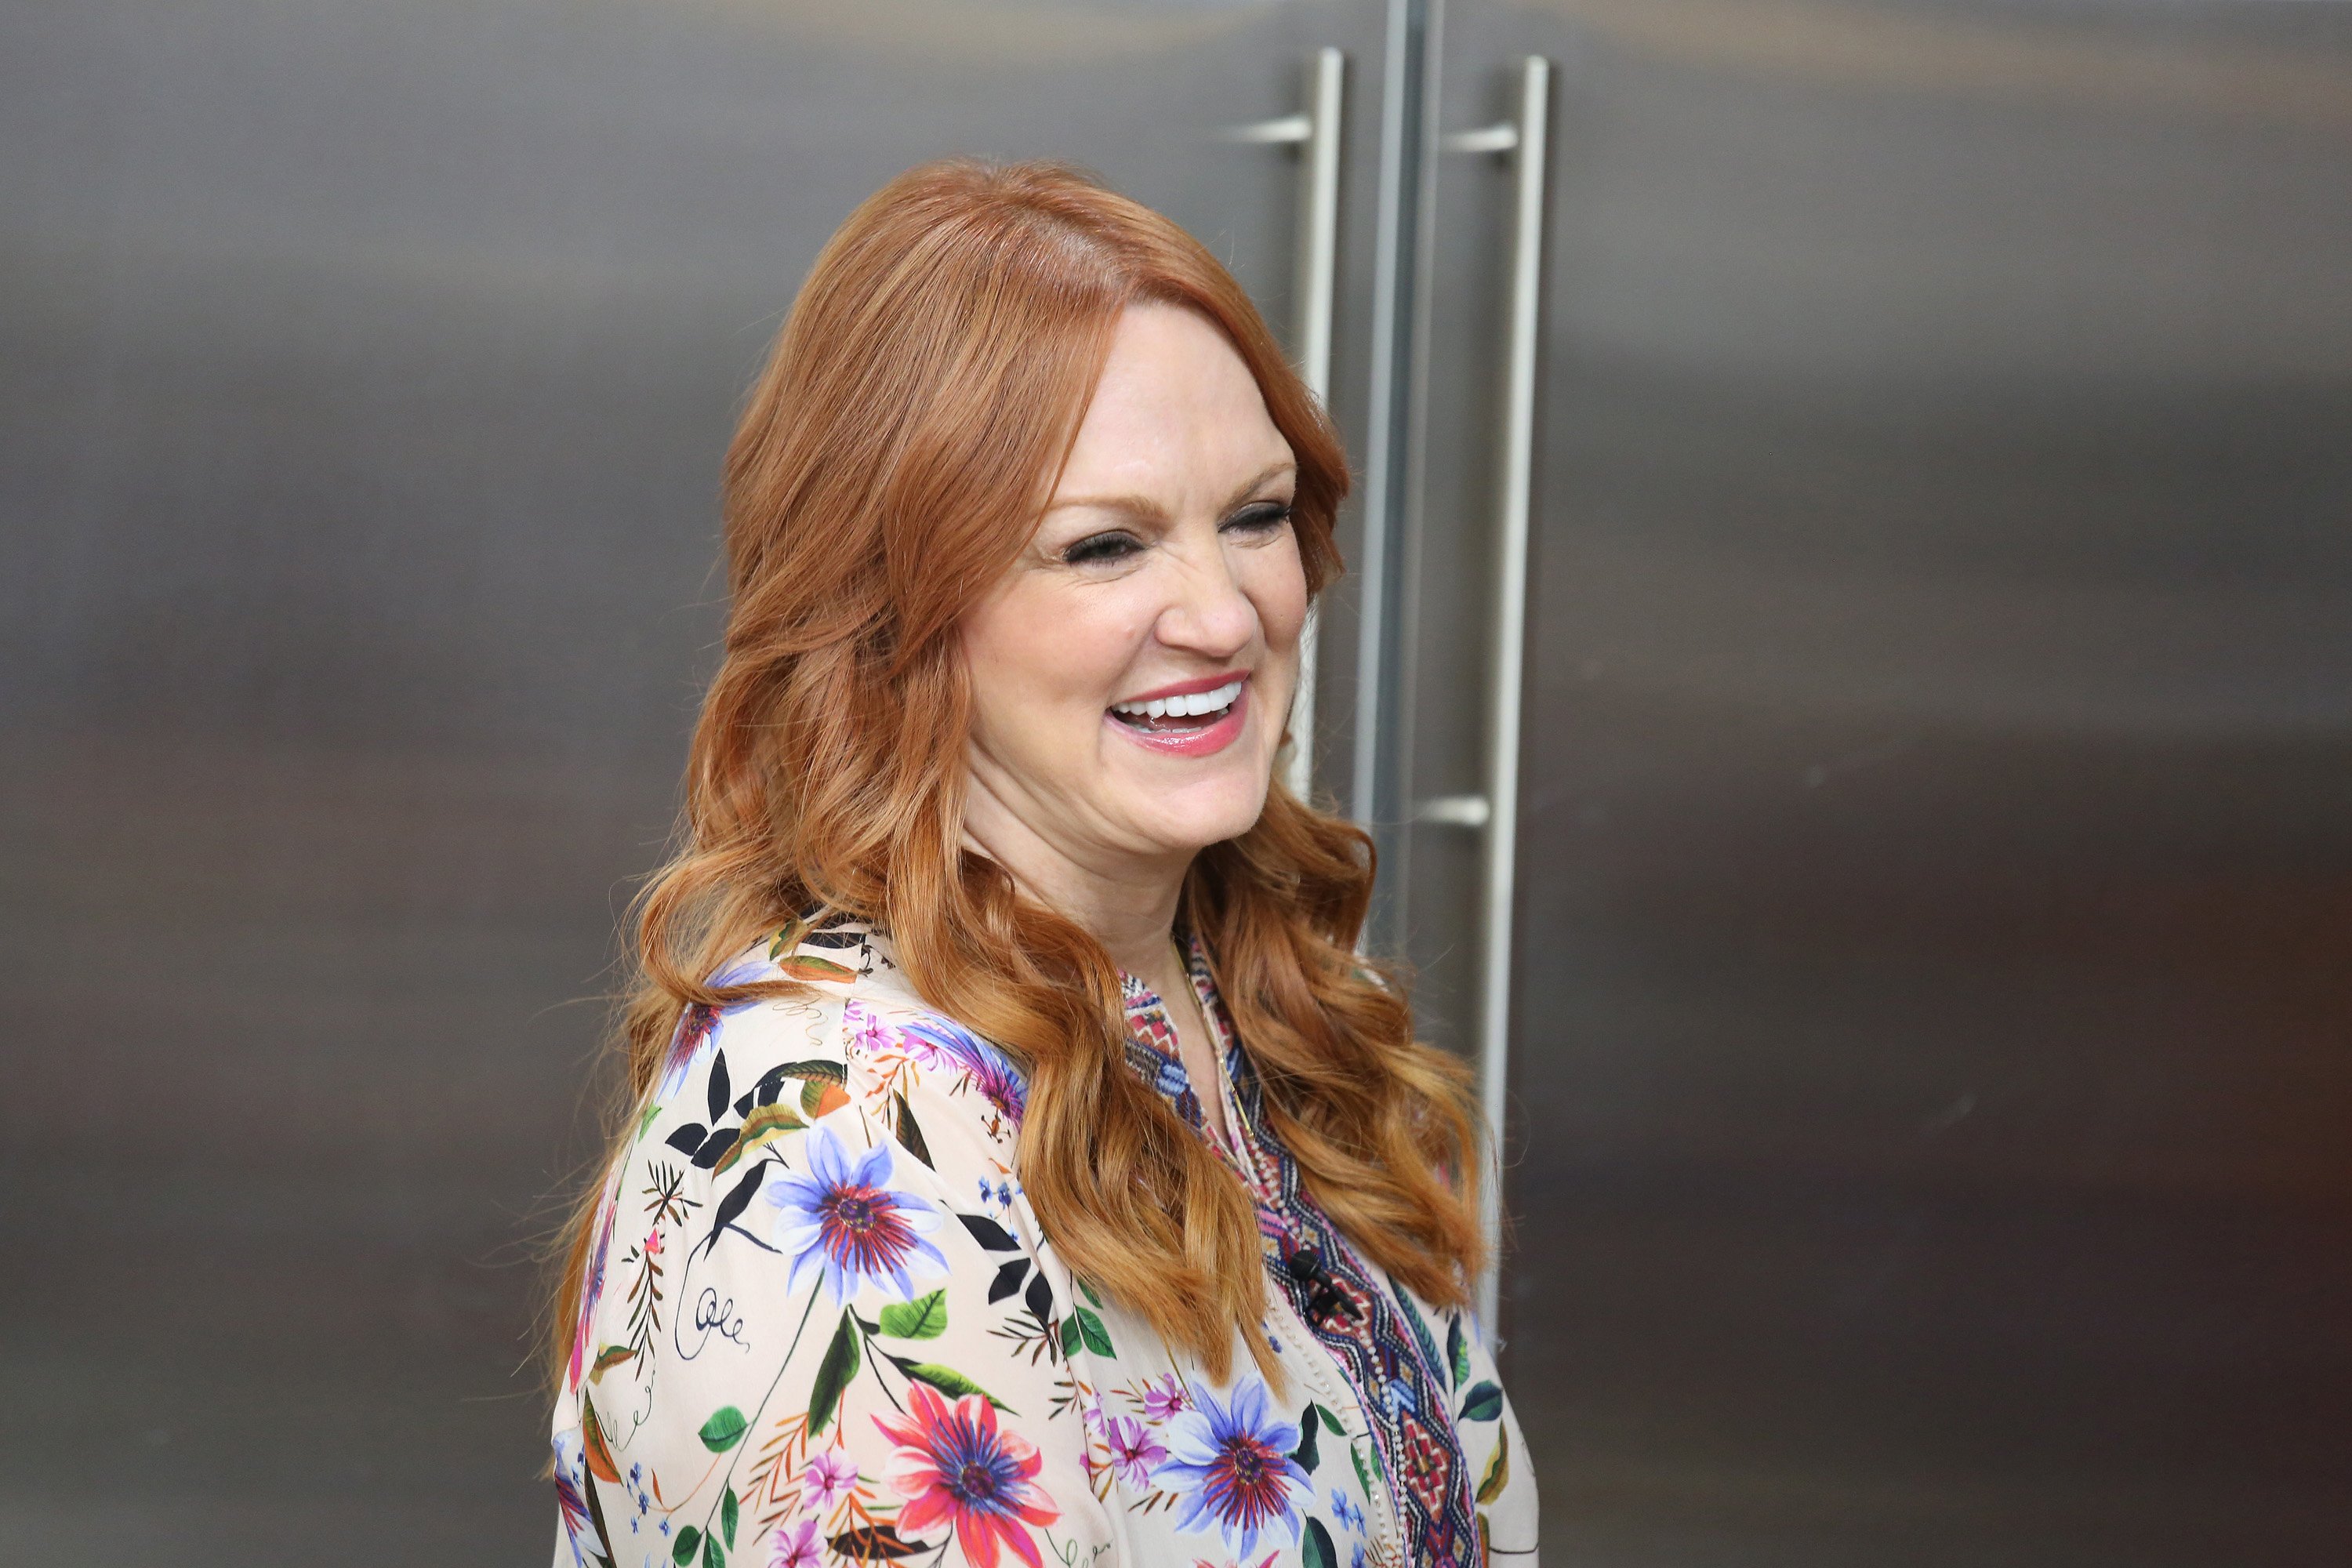 Ree Drummond wears a print long-sleeved blouse in this photograph.